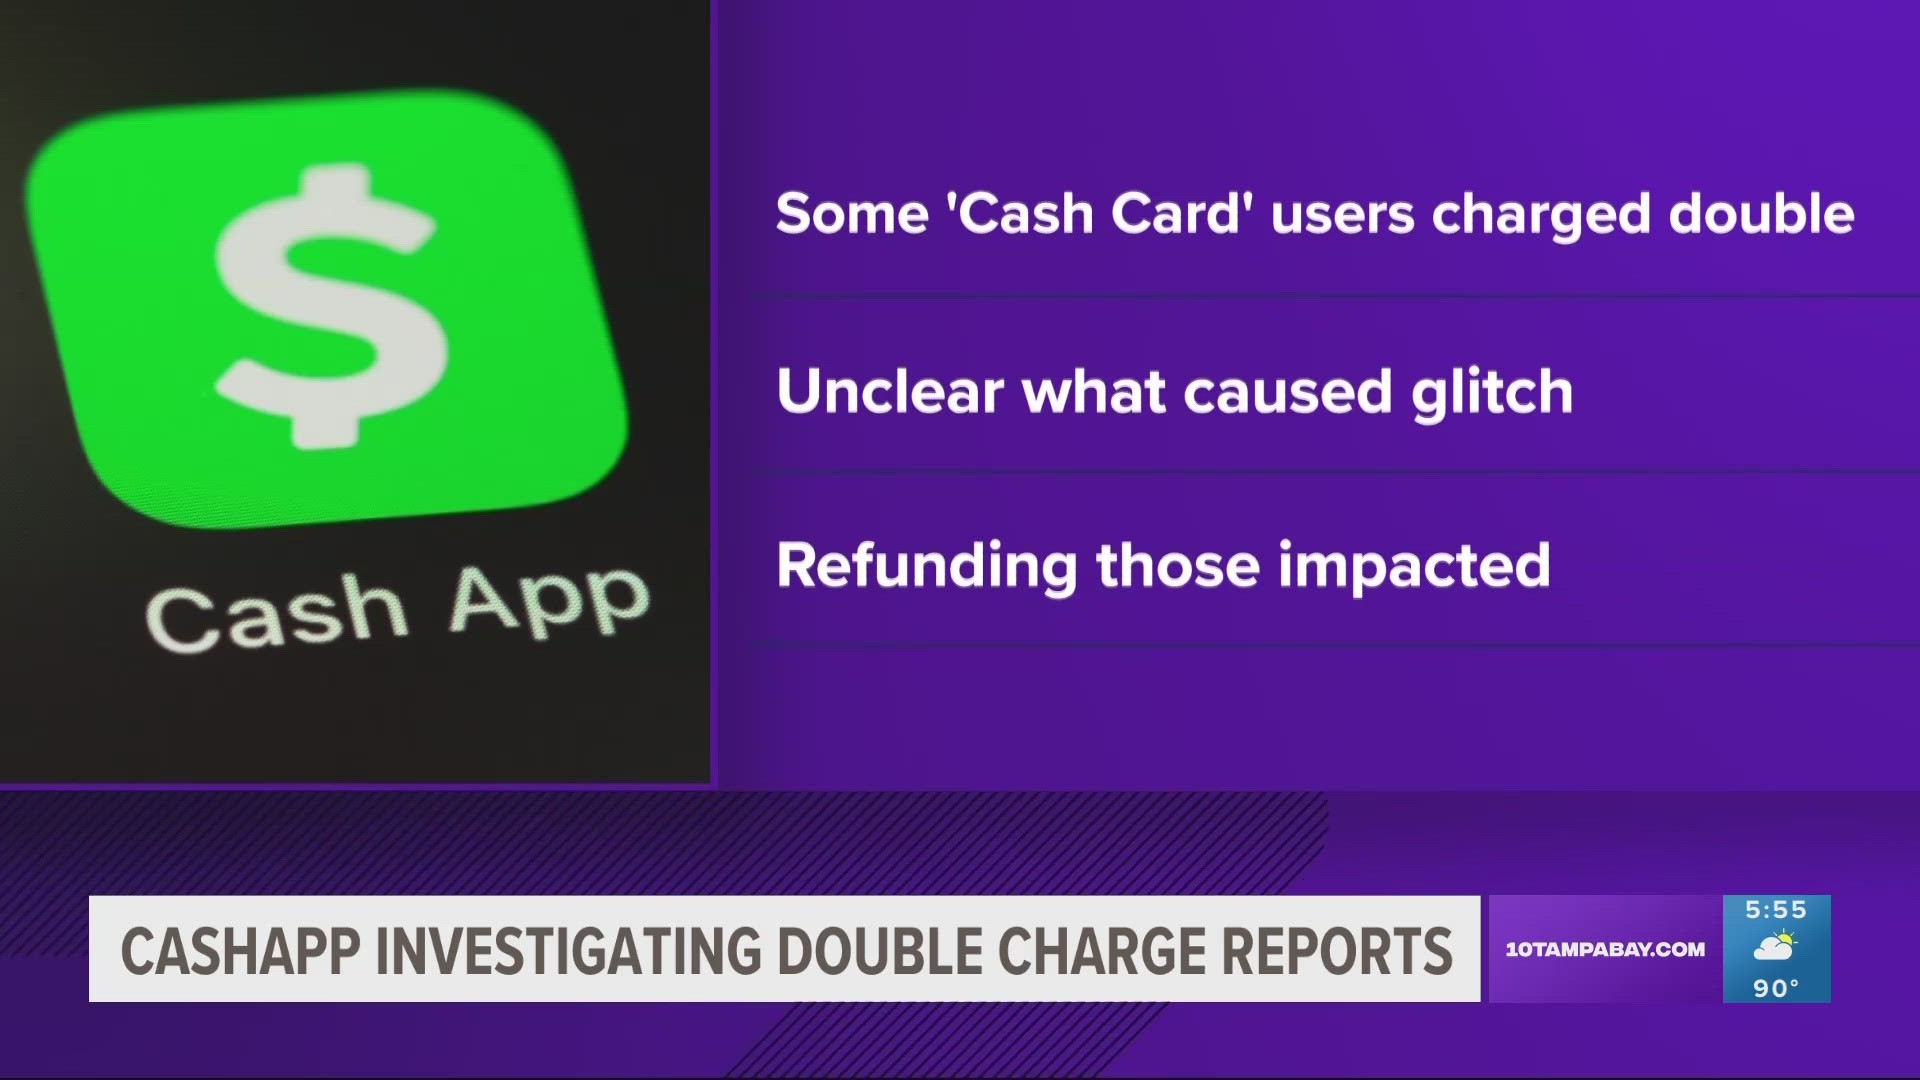 Some Cash App users reported seeing negative account balances after charges went through multiple times.